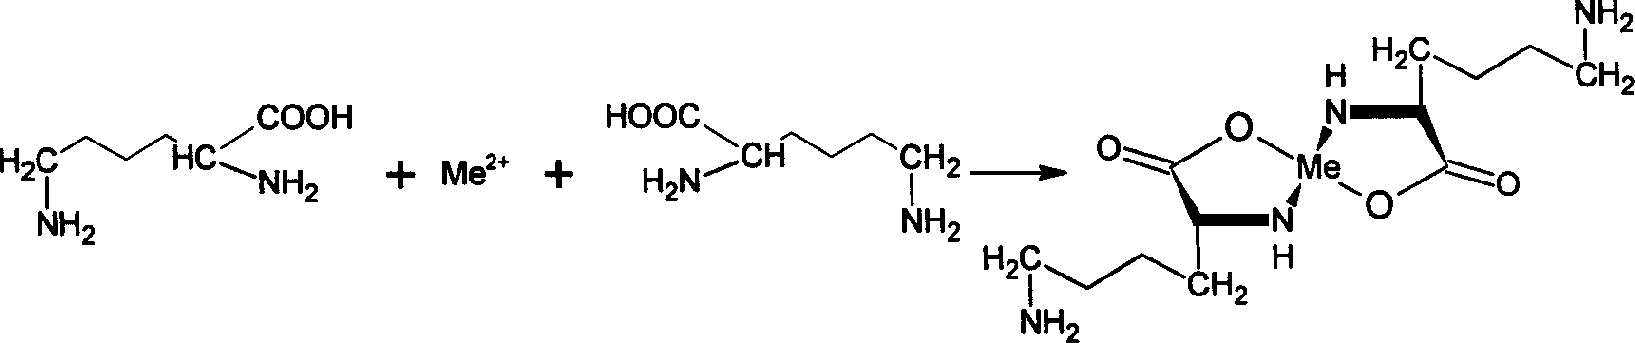 Clean method for producing high-purity laminine